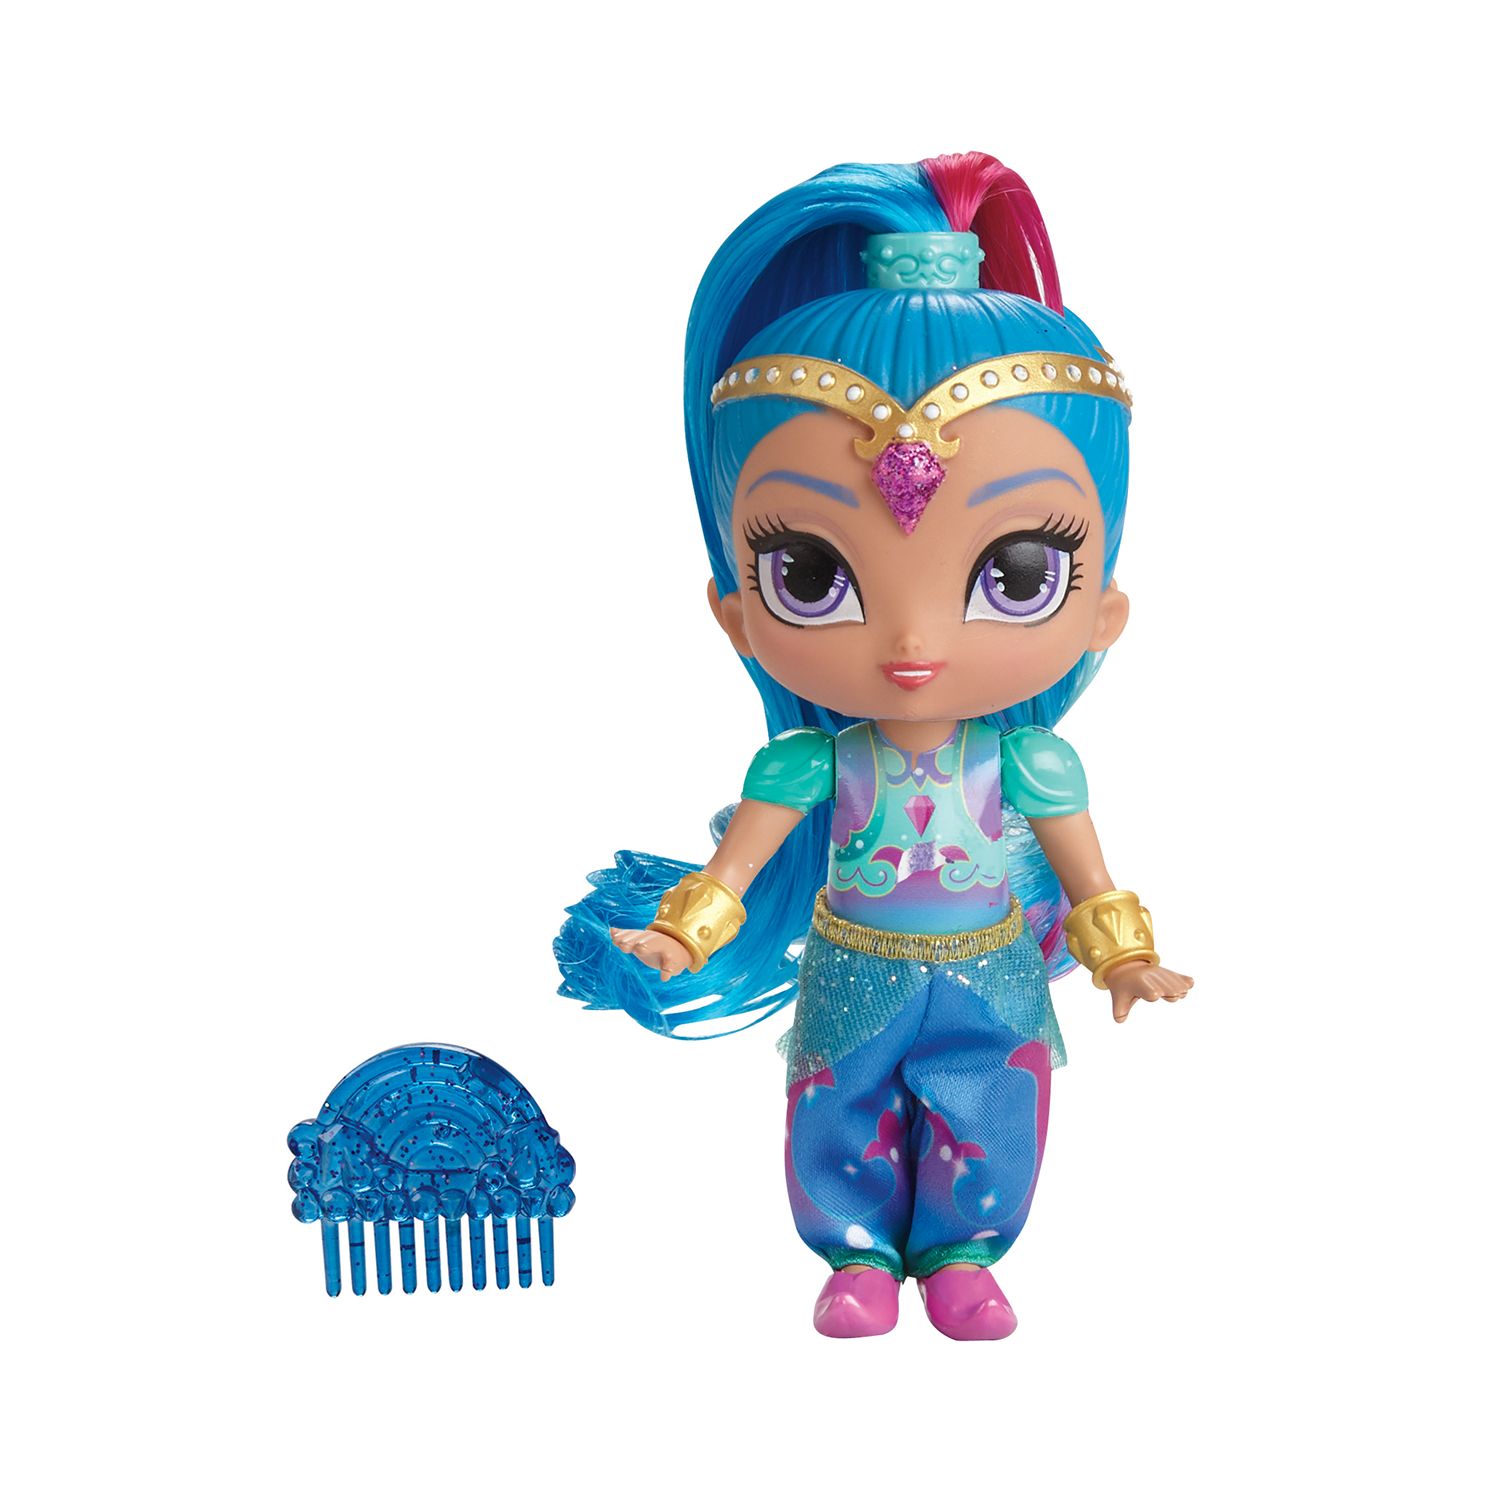 fisher price shimmer and shine doll